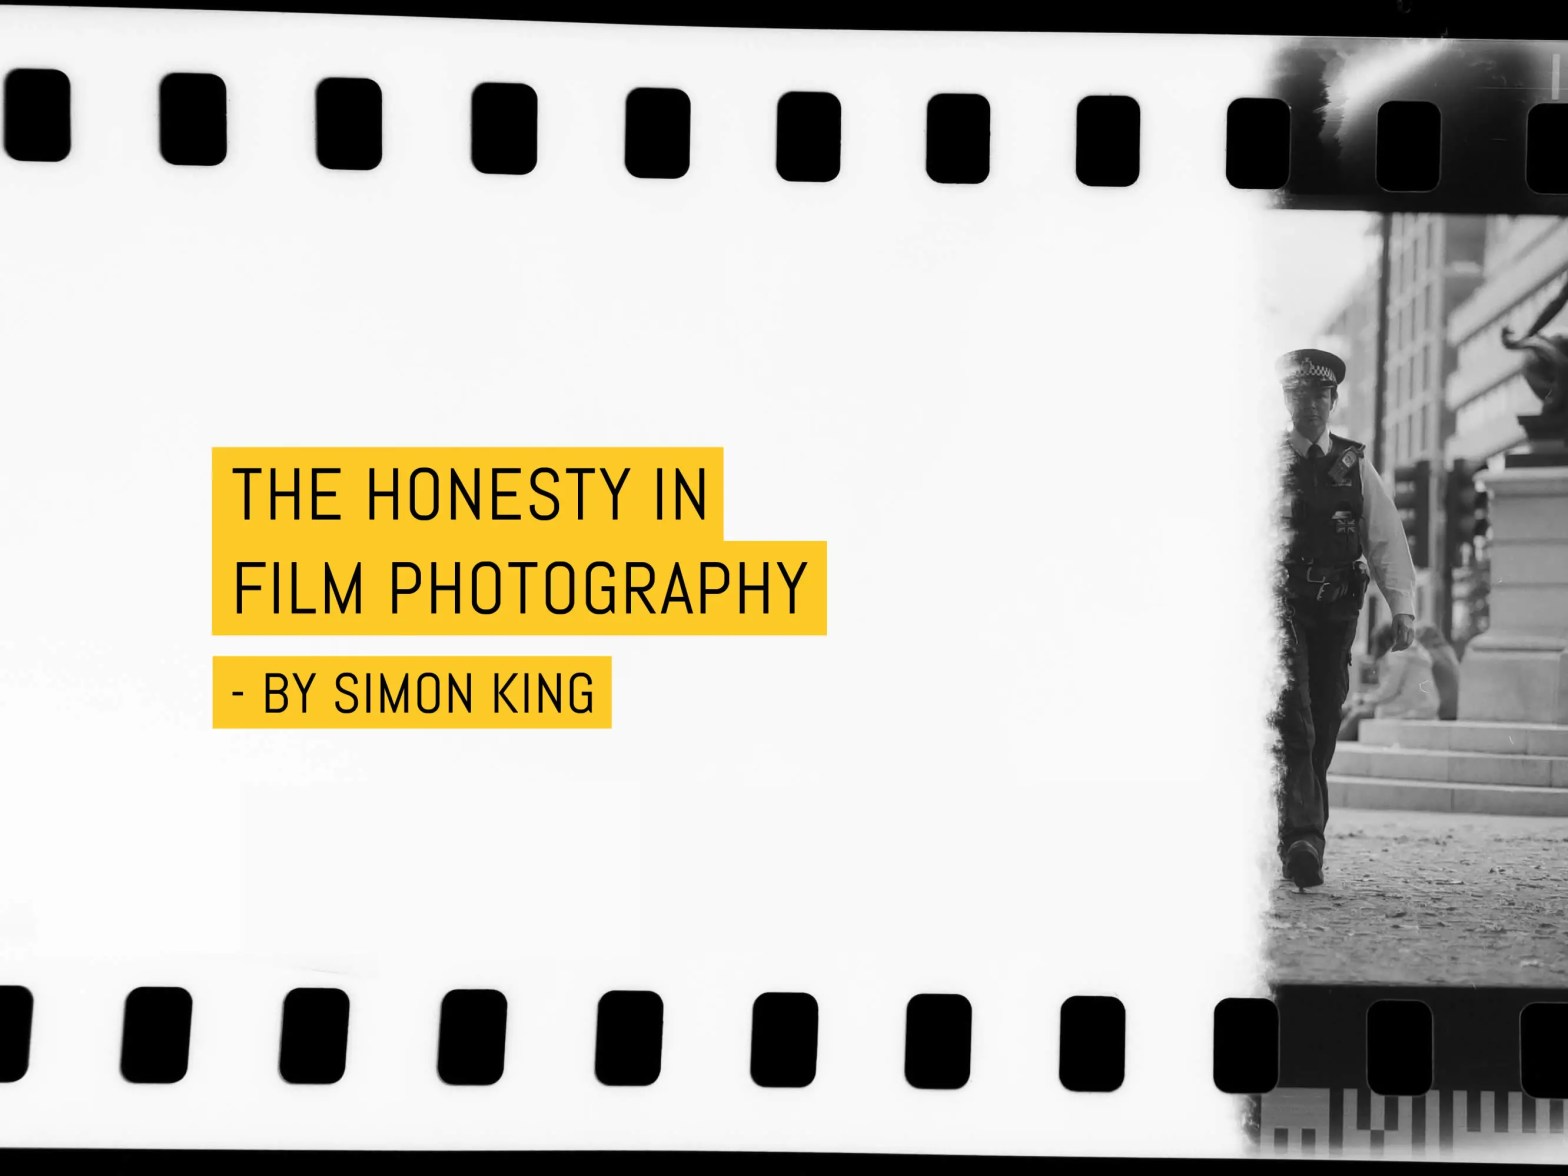 The Honesty in film photography